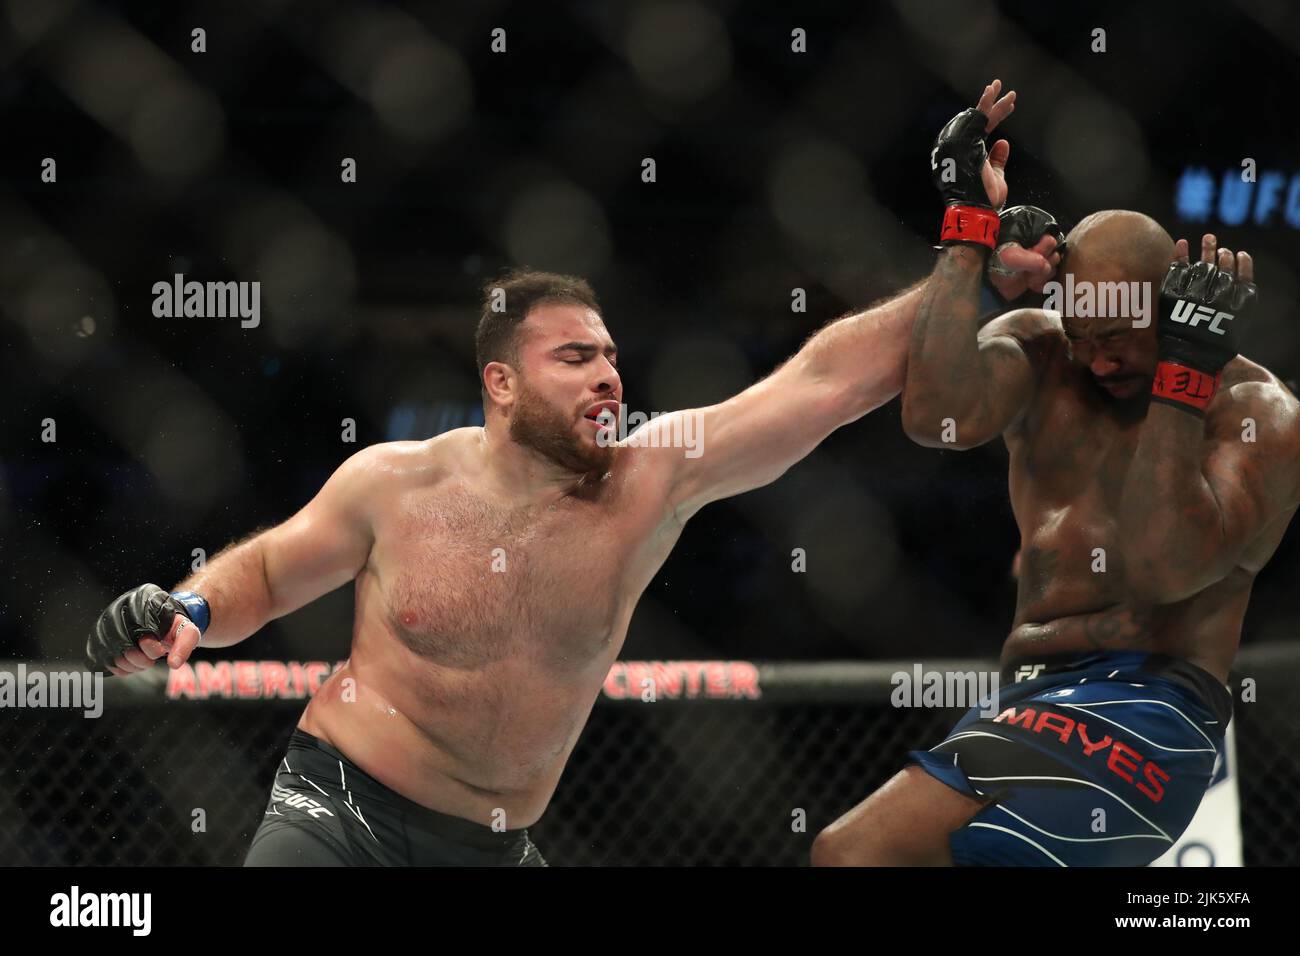 DALLAS, TX - JULY 30: (L-R) Hamdy Abdelwahab punches Don'Tale Mayes in their Heavyweight bout during the UFC 277 event at American Airlines Center on July 30, 2022, in Dallas, Texas, United States. (Photo by Alejandro Salazar/PxImages) Credit: Px Images/Alamy Live News Stock Photo